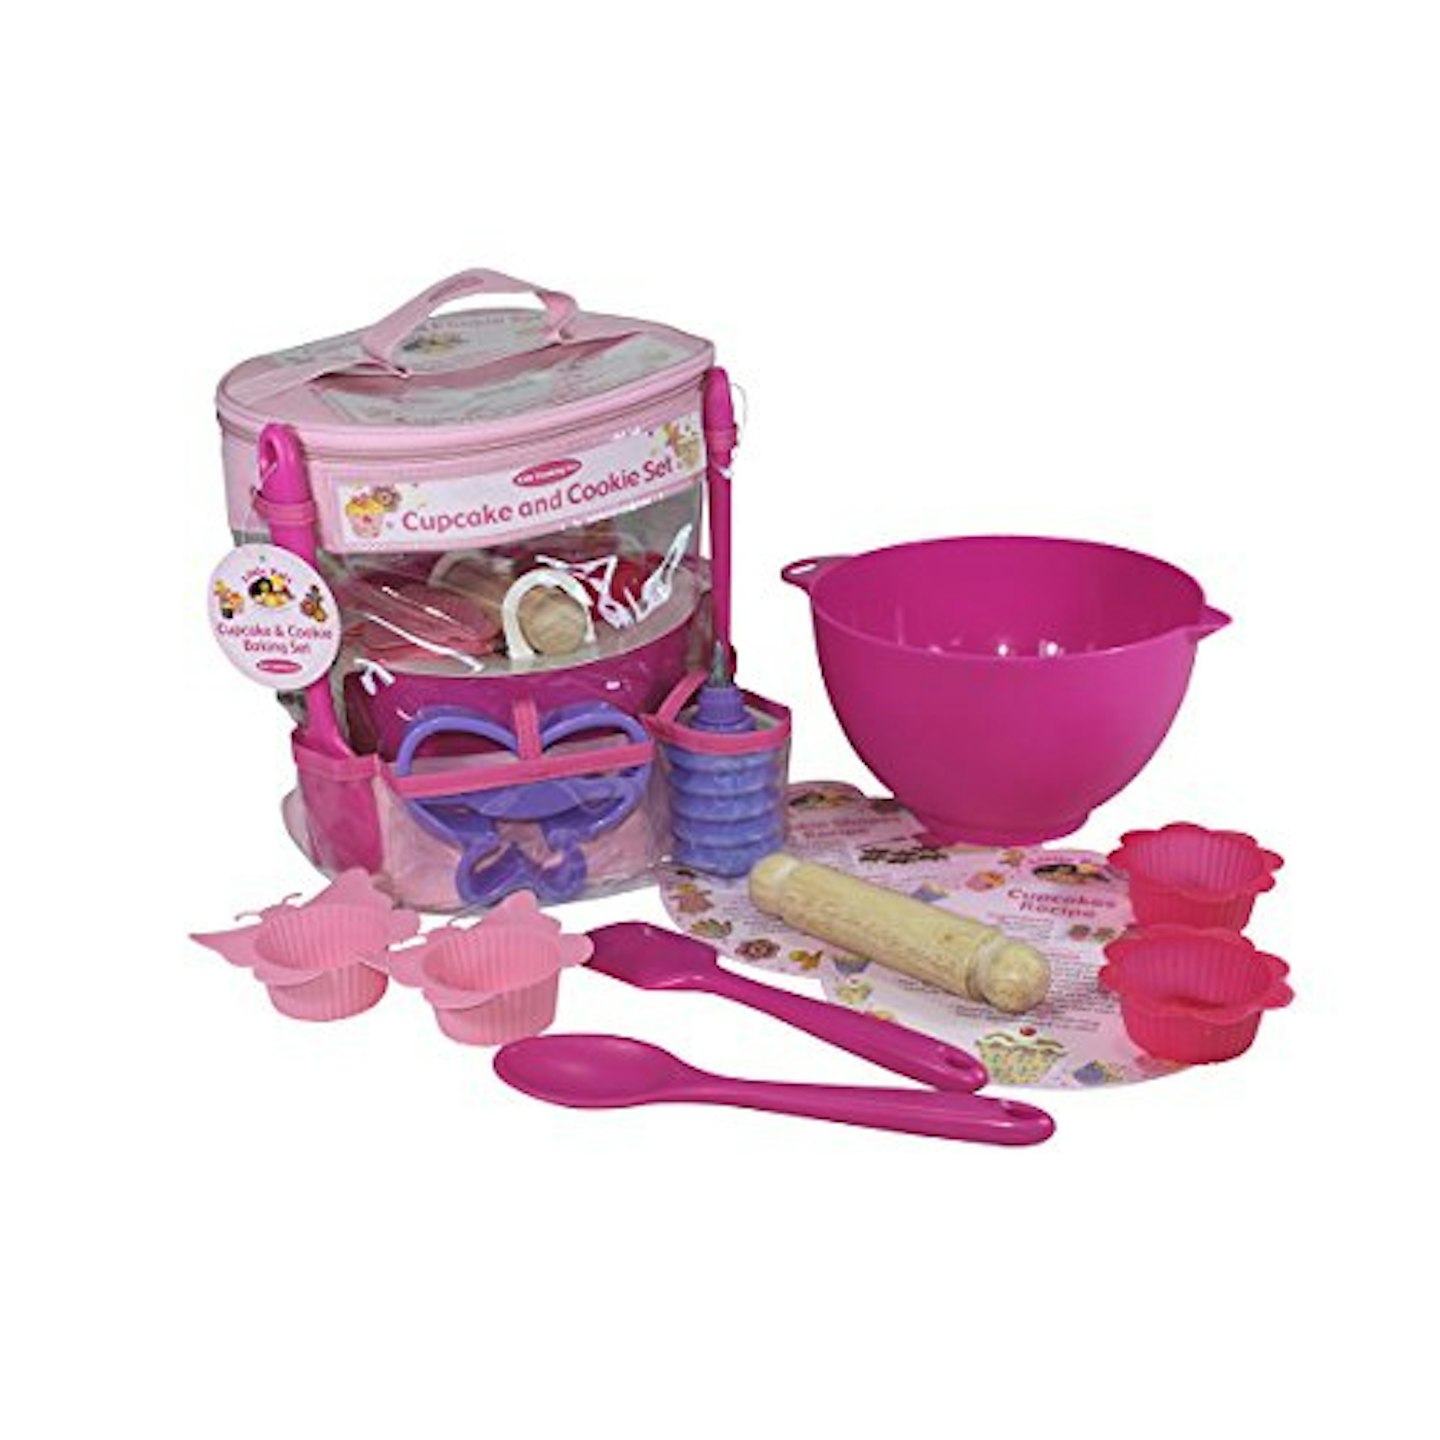 Childrenu0026#039;s Baking Set for Cupcakes and Cookies by Little Pals